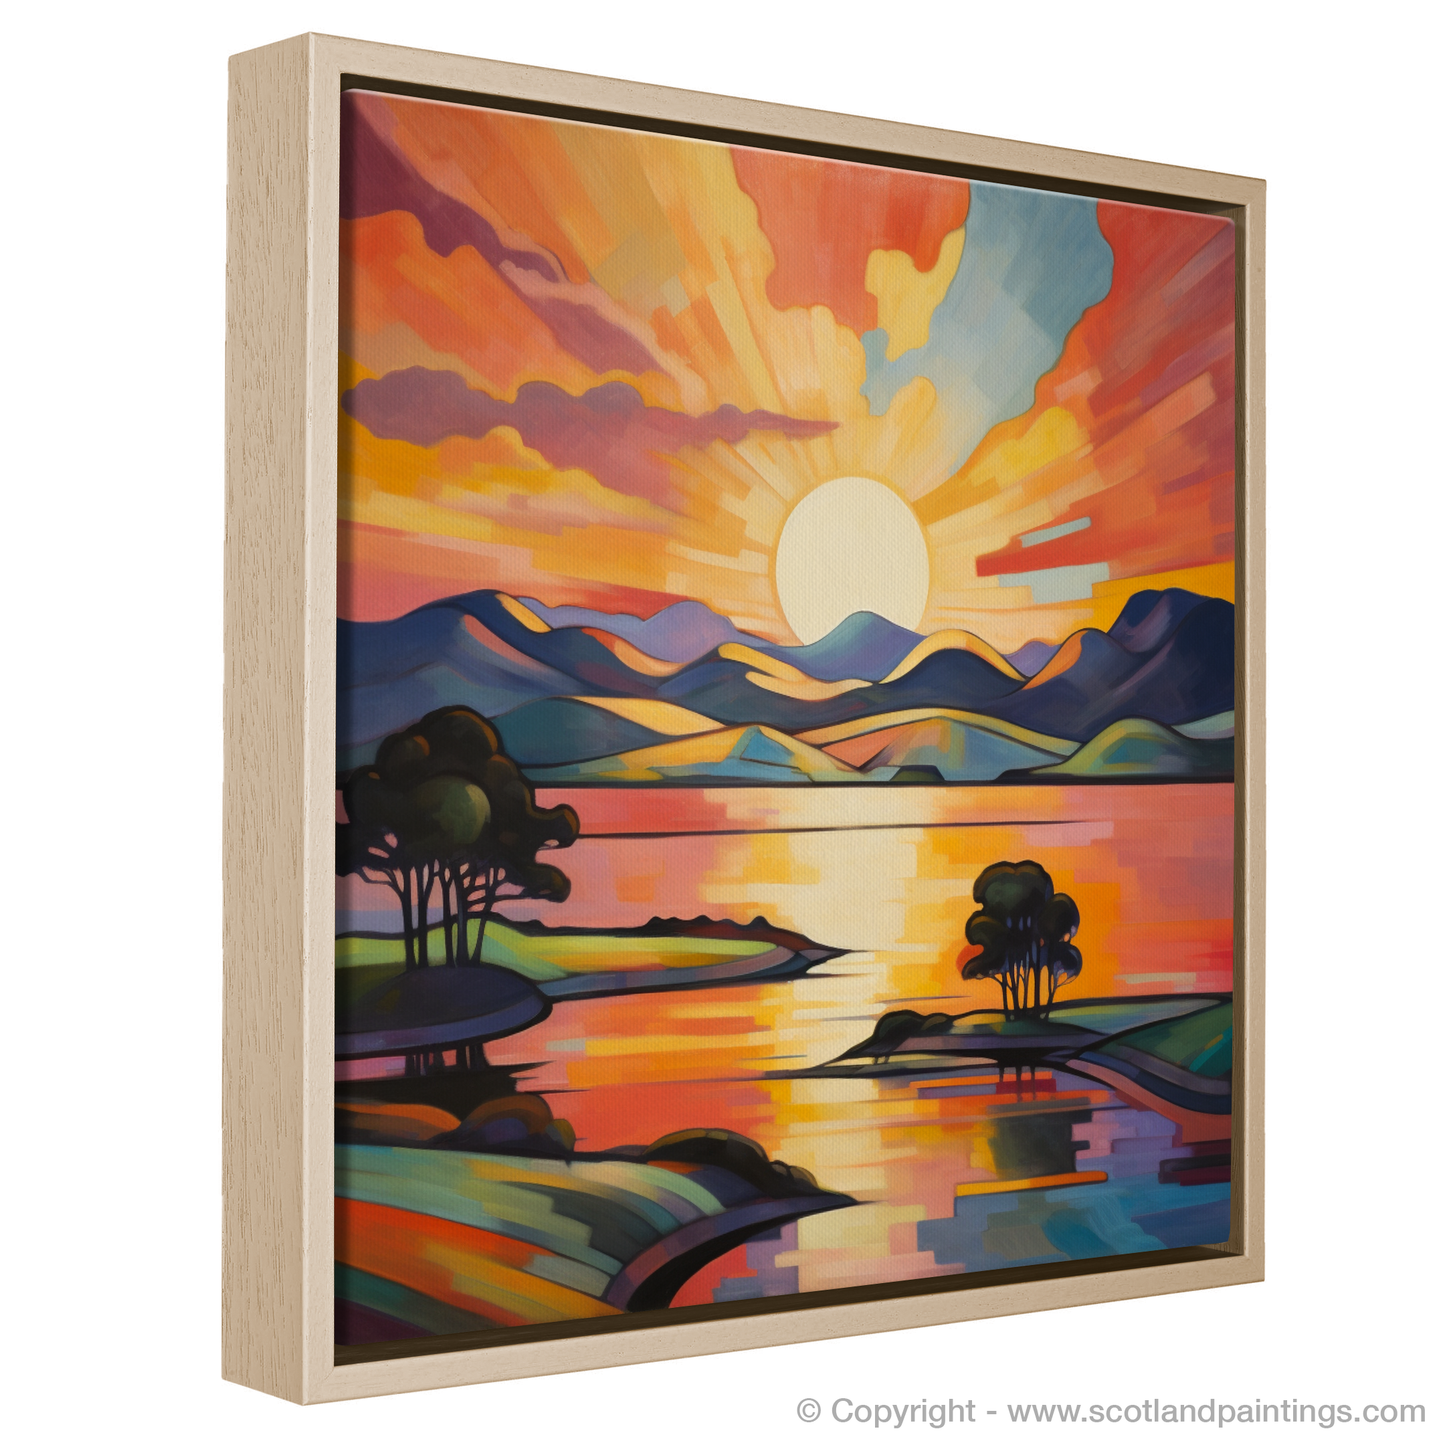 Painting and Art Print of Sunset over Loch Lomond entitled "Cubist Sunset over Loch Lomond".